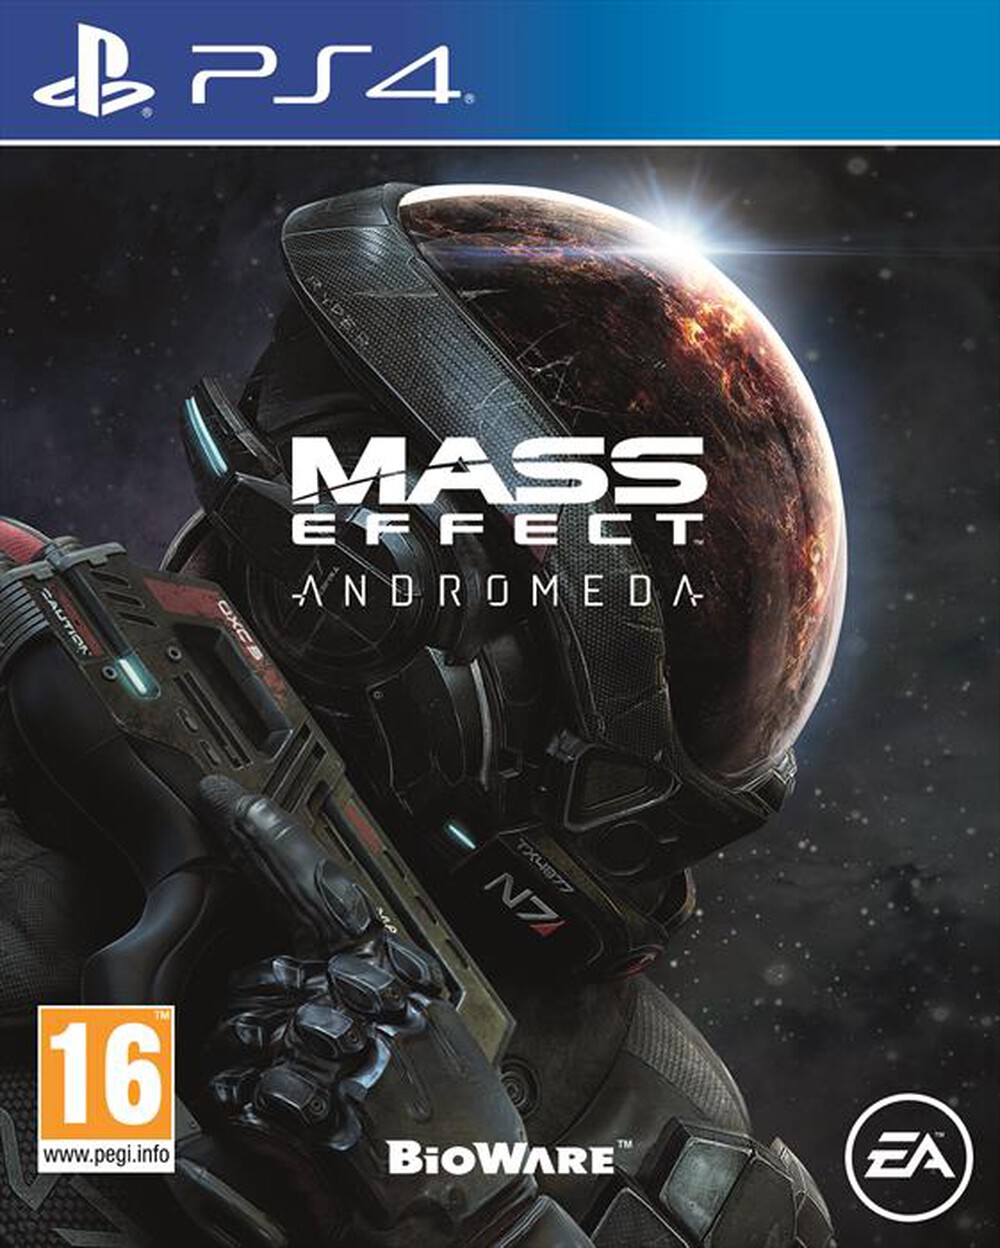 "ELECTRONIC ARTS - Mass Effect Andromeda PS4"